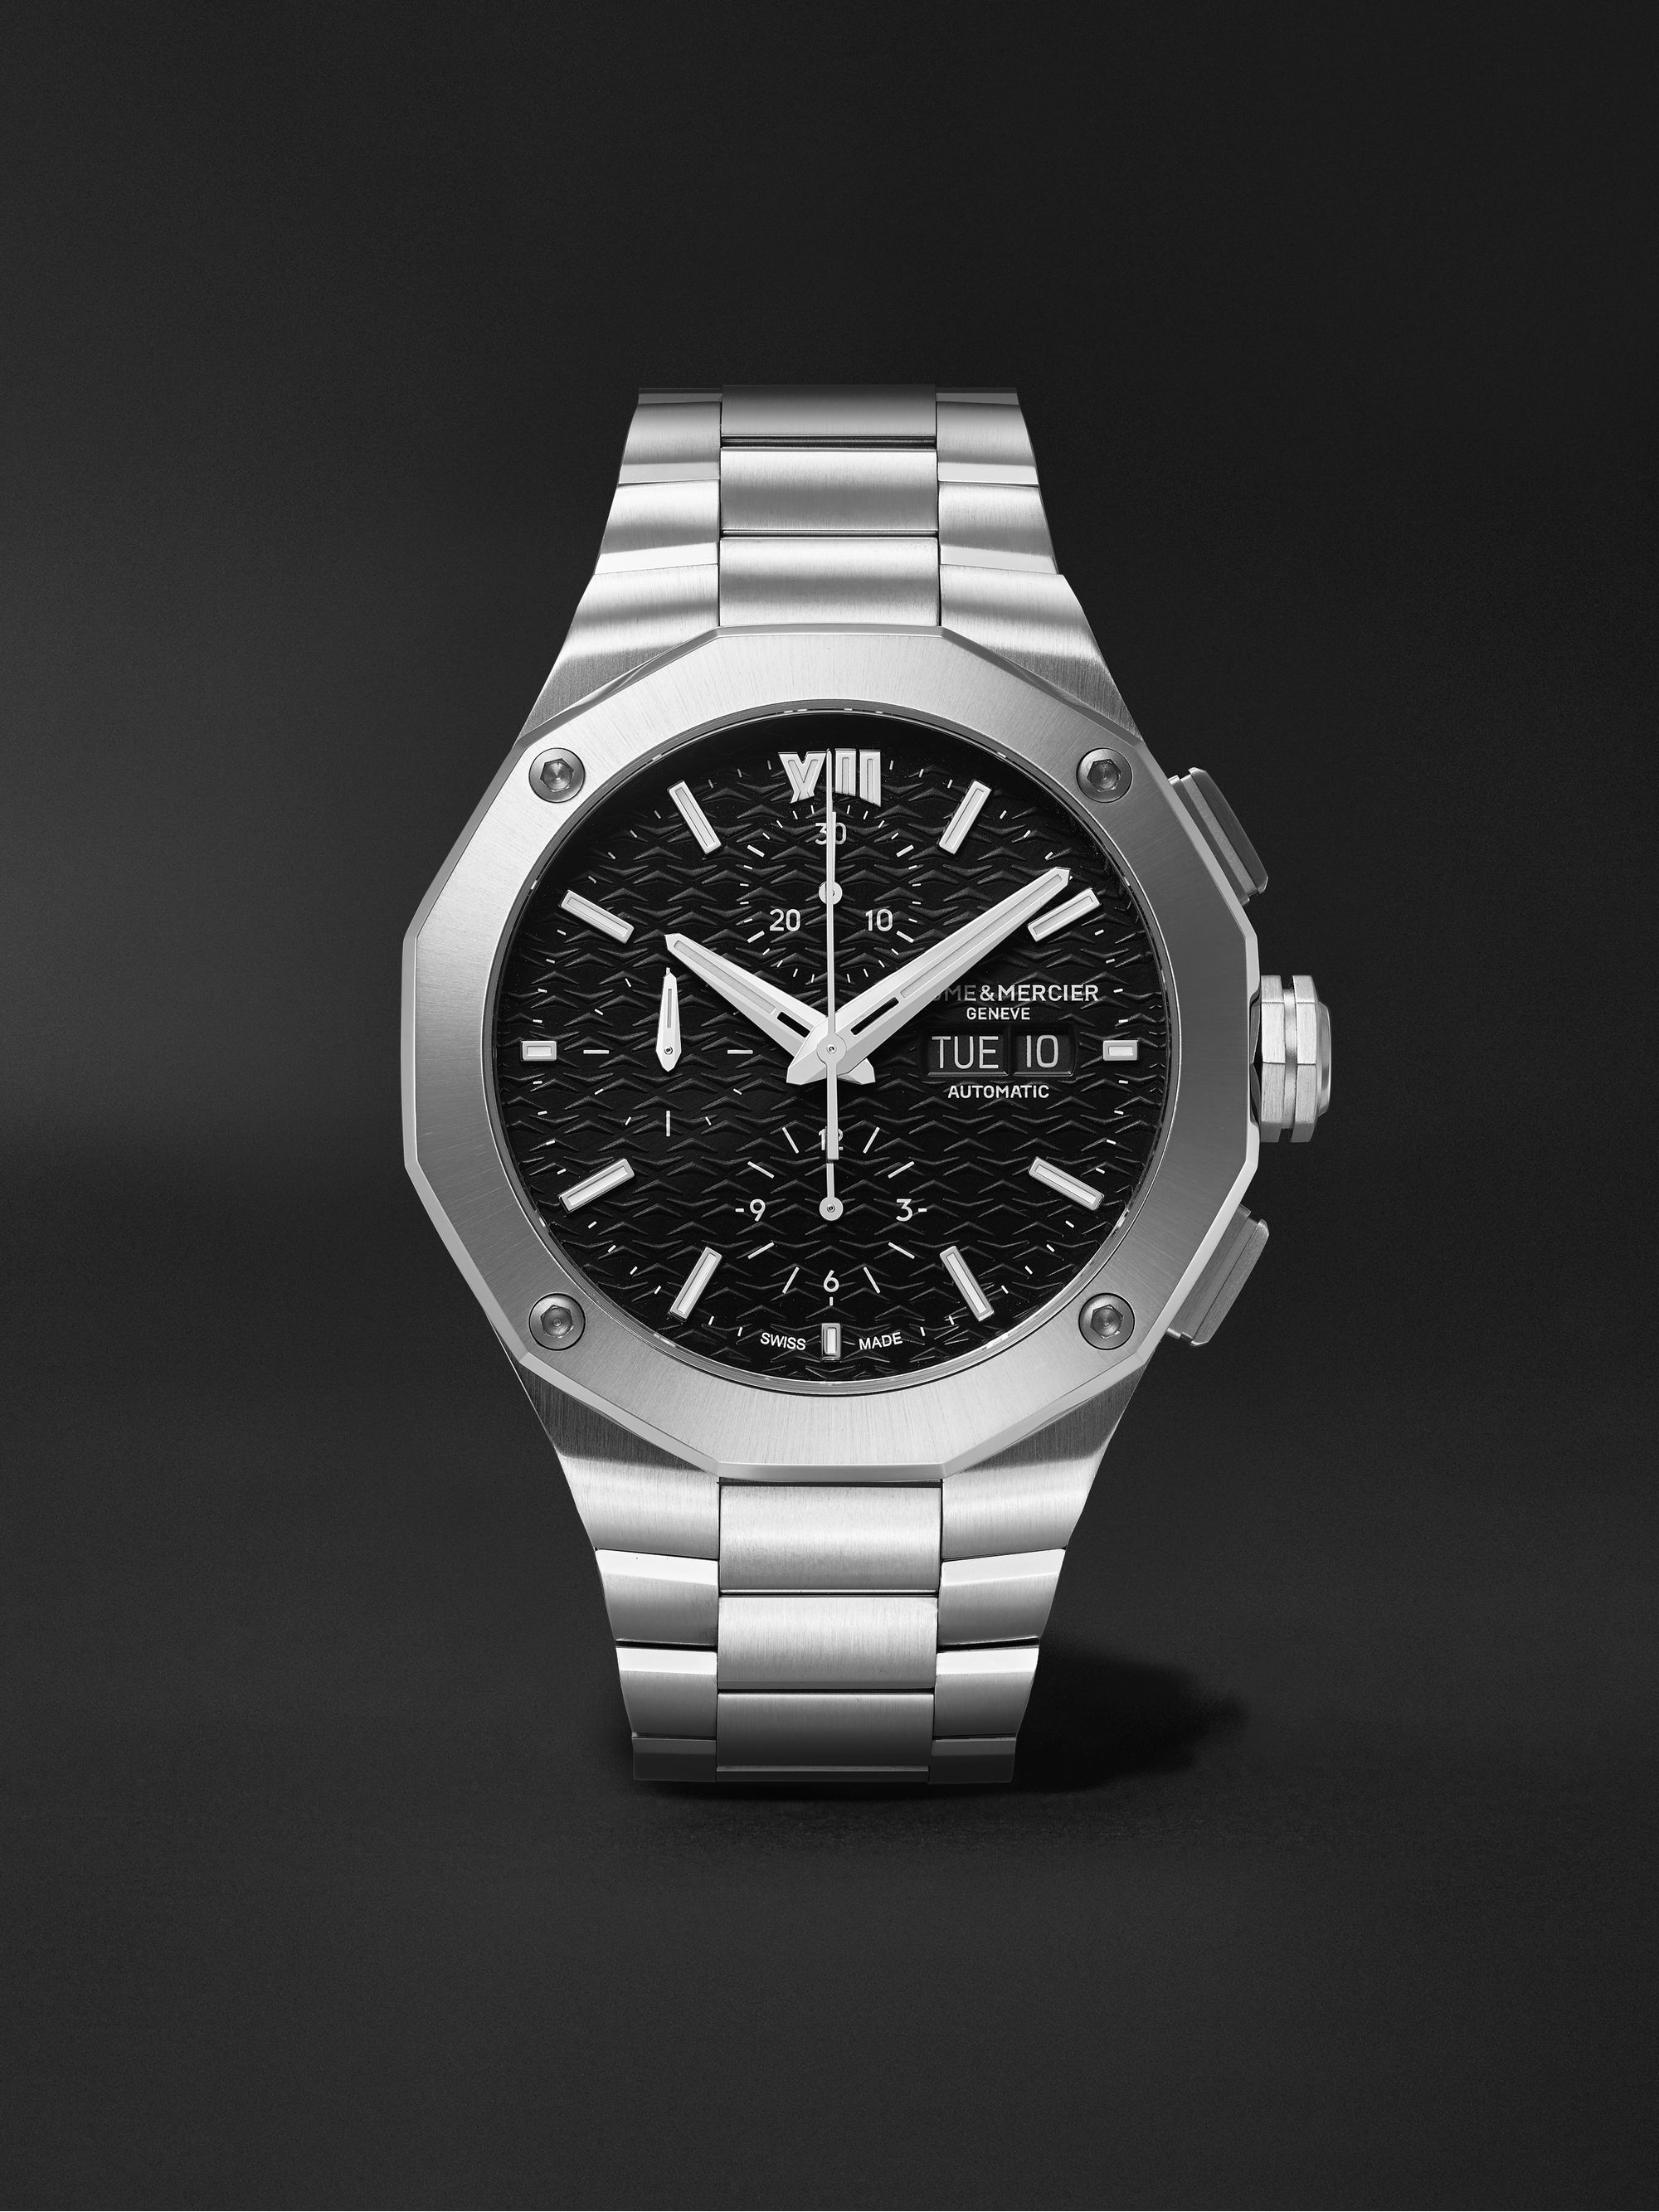 BAUME & MERCIER Riviera Automatic Chronograph 43mm Stainless Steel Watch, Ref. No. M0A10624